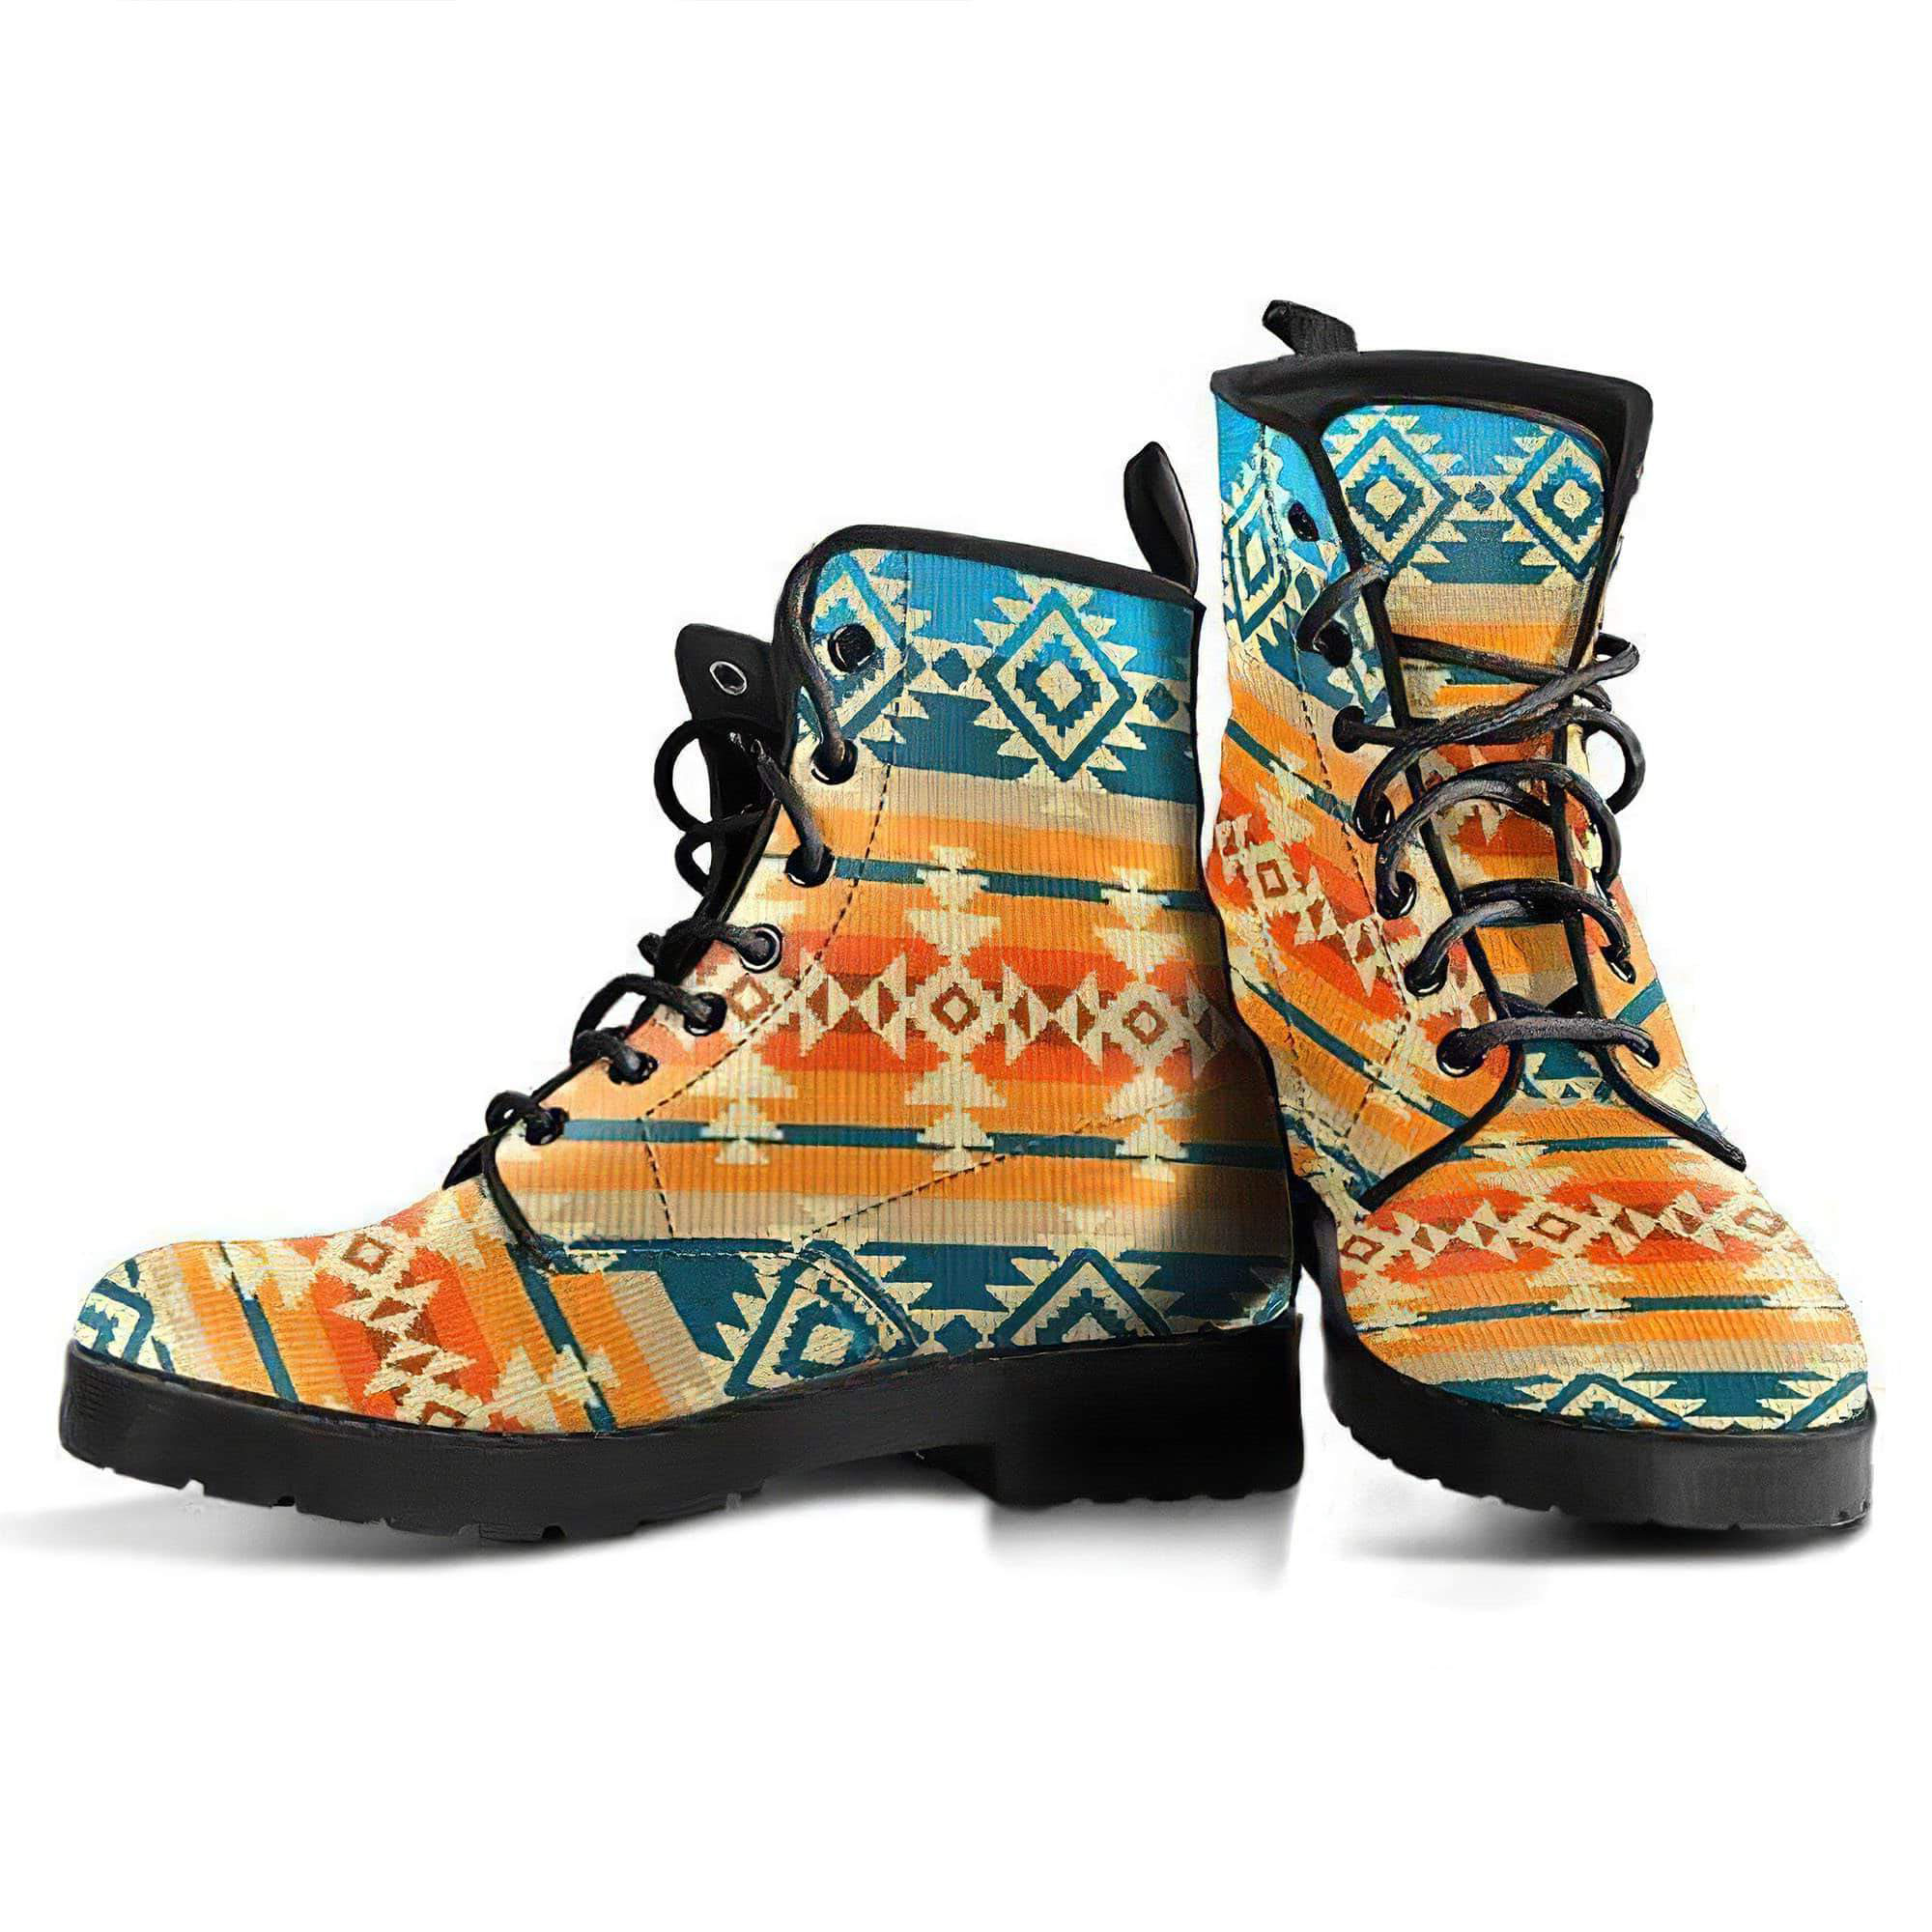 native-american-5-handcrafted-boots-women-s-leather-boots-12051913703485.jpg